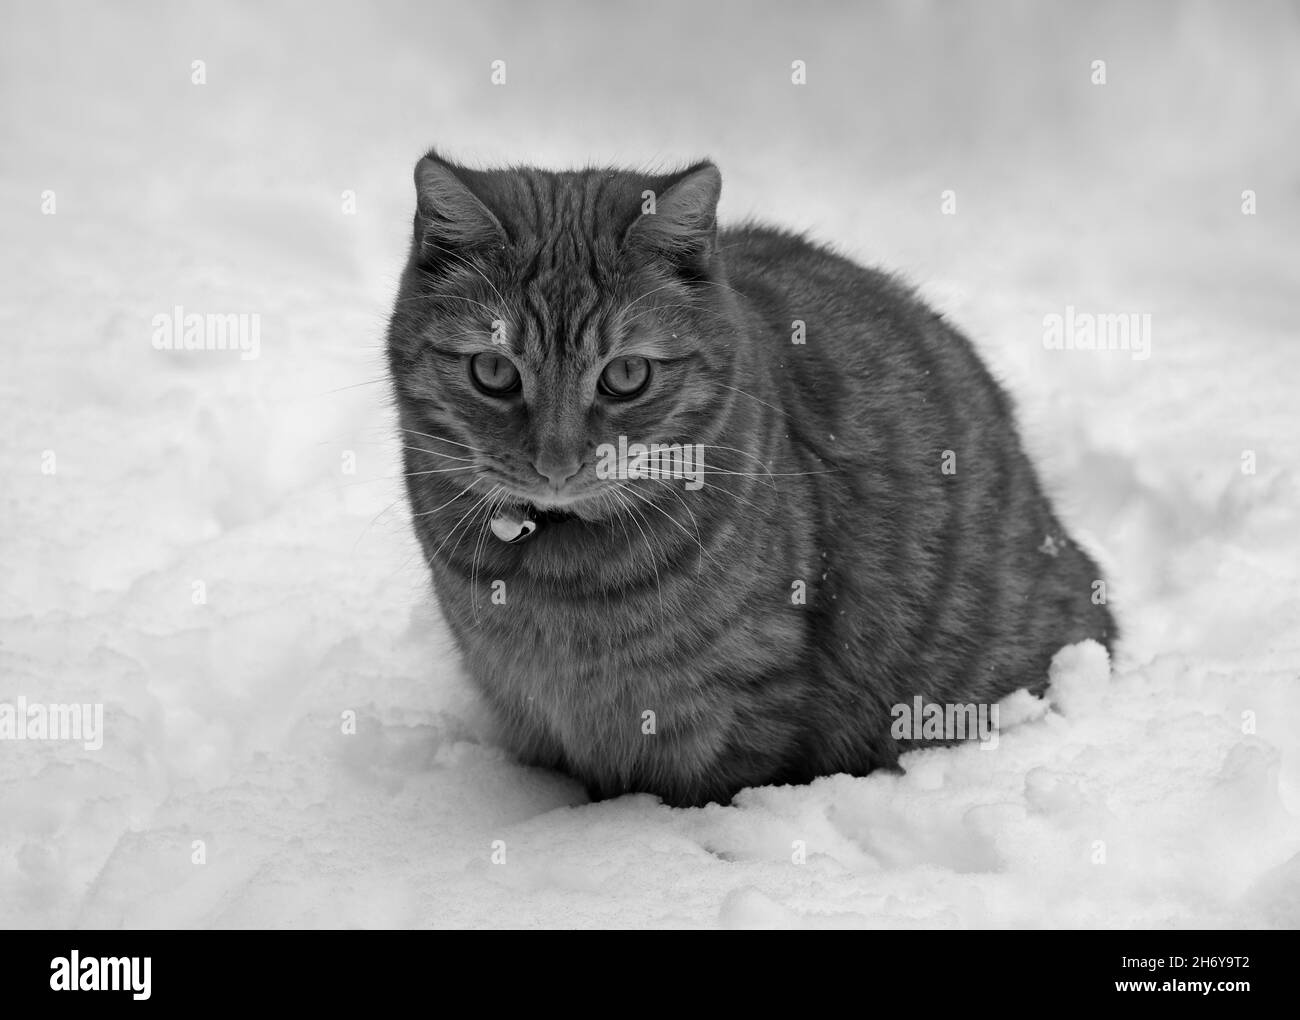 A Monochrome study of a Ginger cat experiencing it's first snow Stock Photo